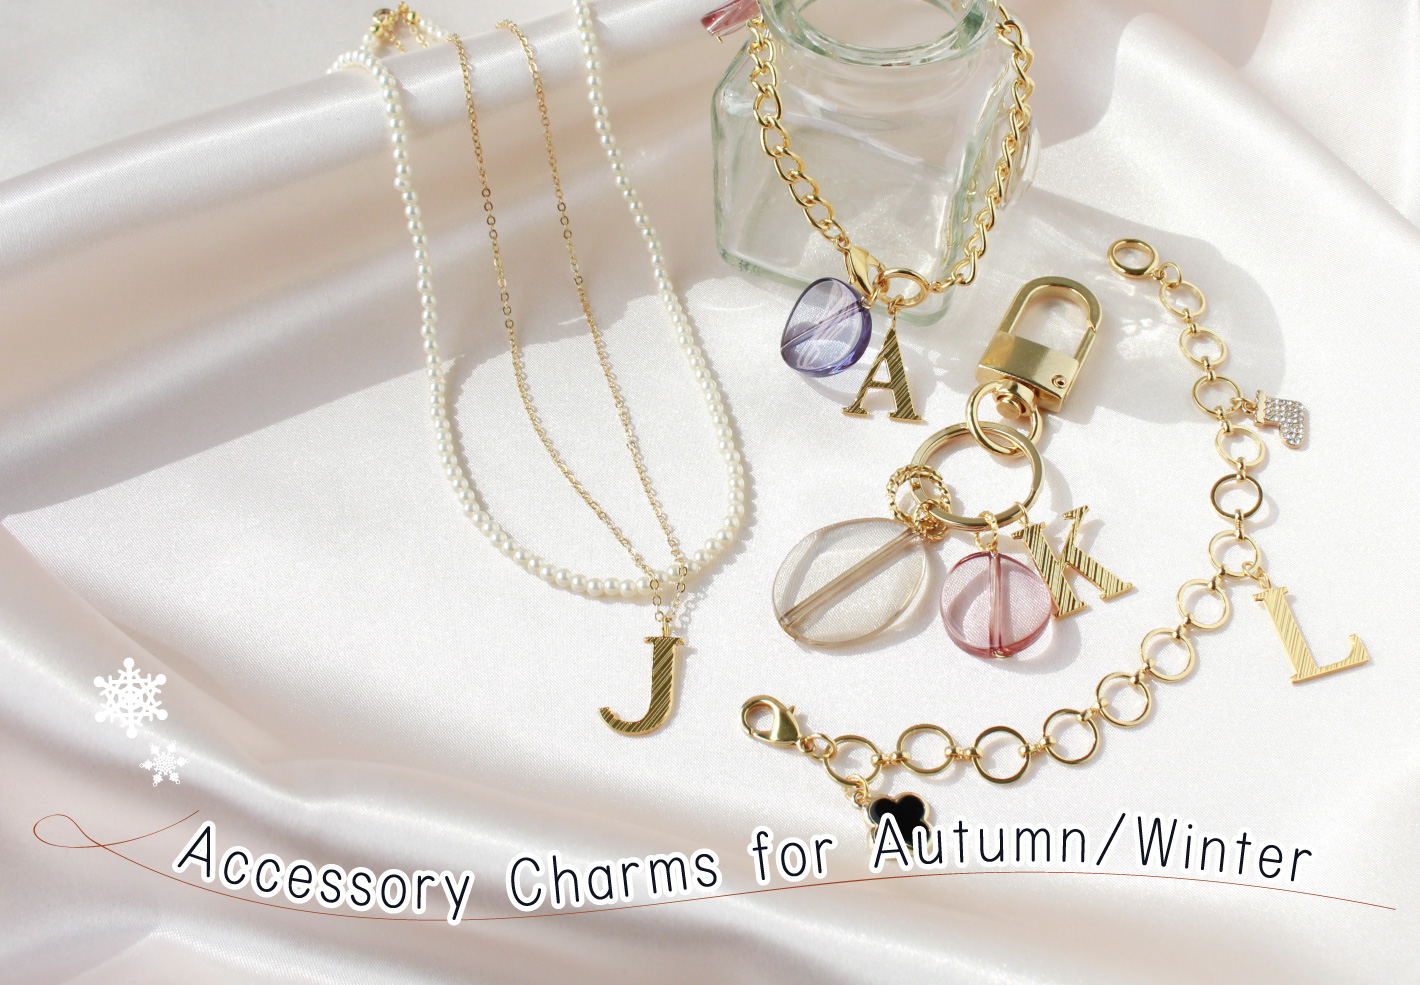 Featuring charms for fall and winter accessories